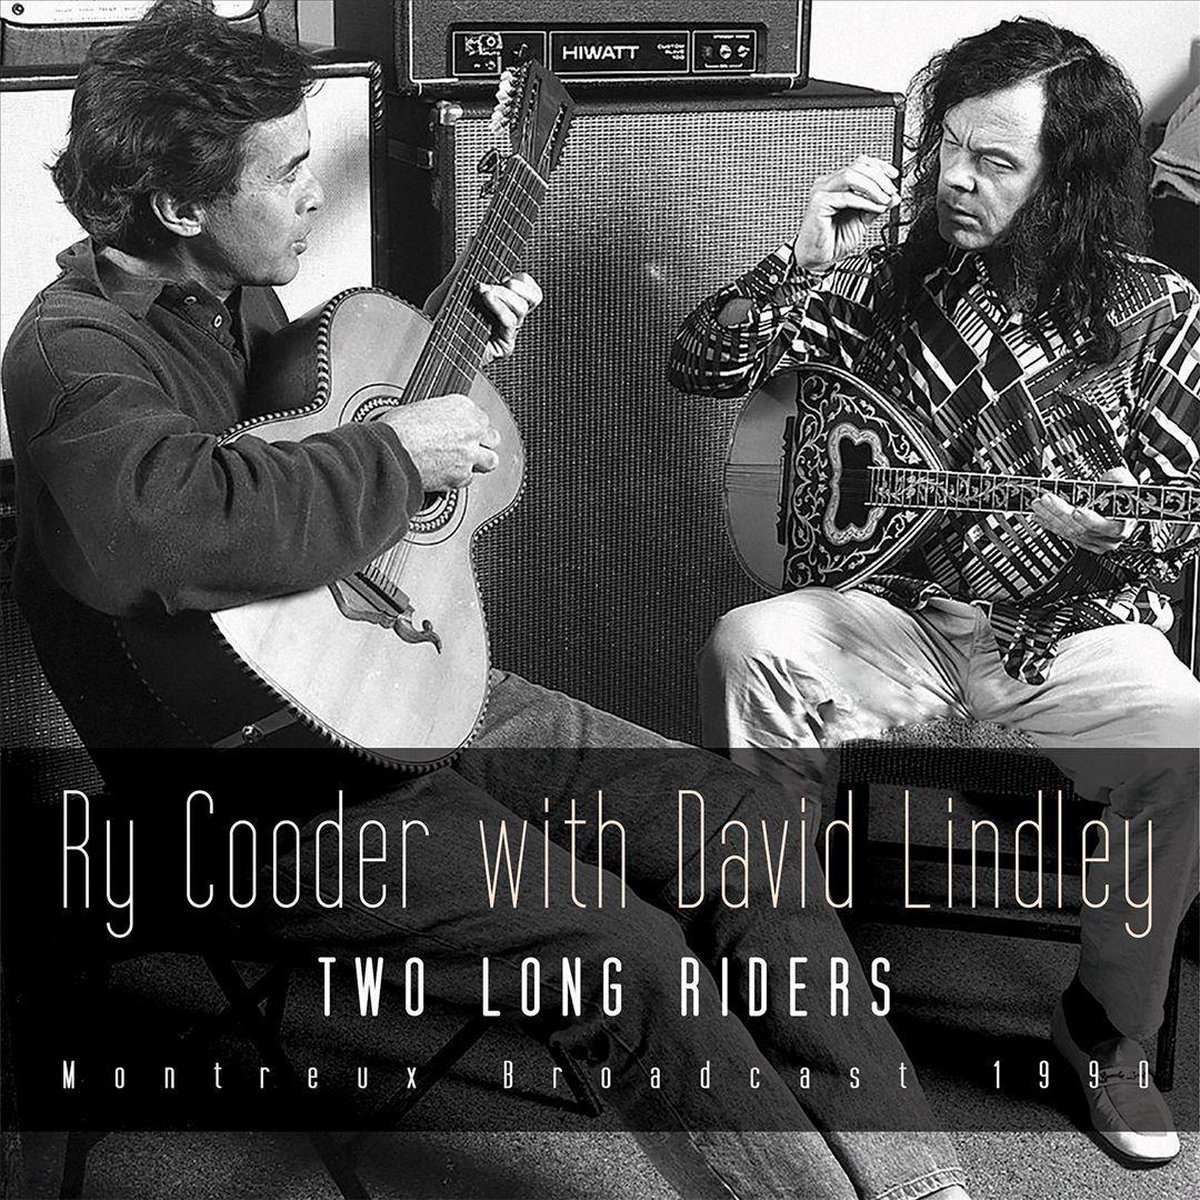 Two Long Riders - Ry Cooder with David Lindley